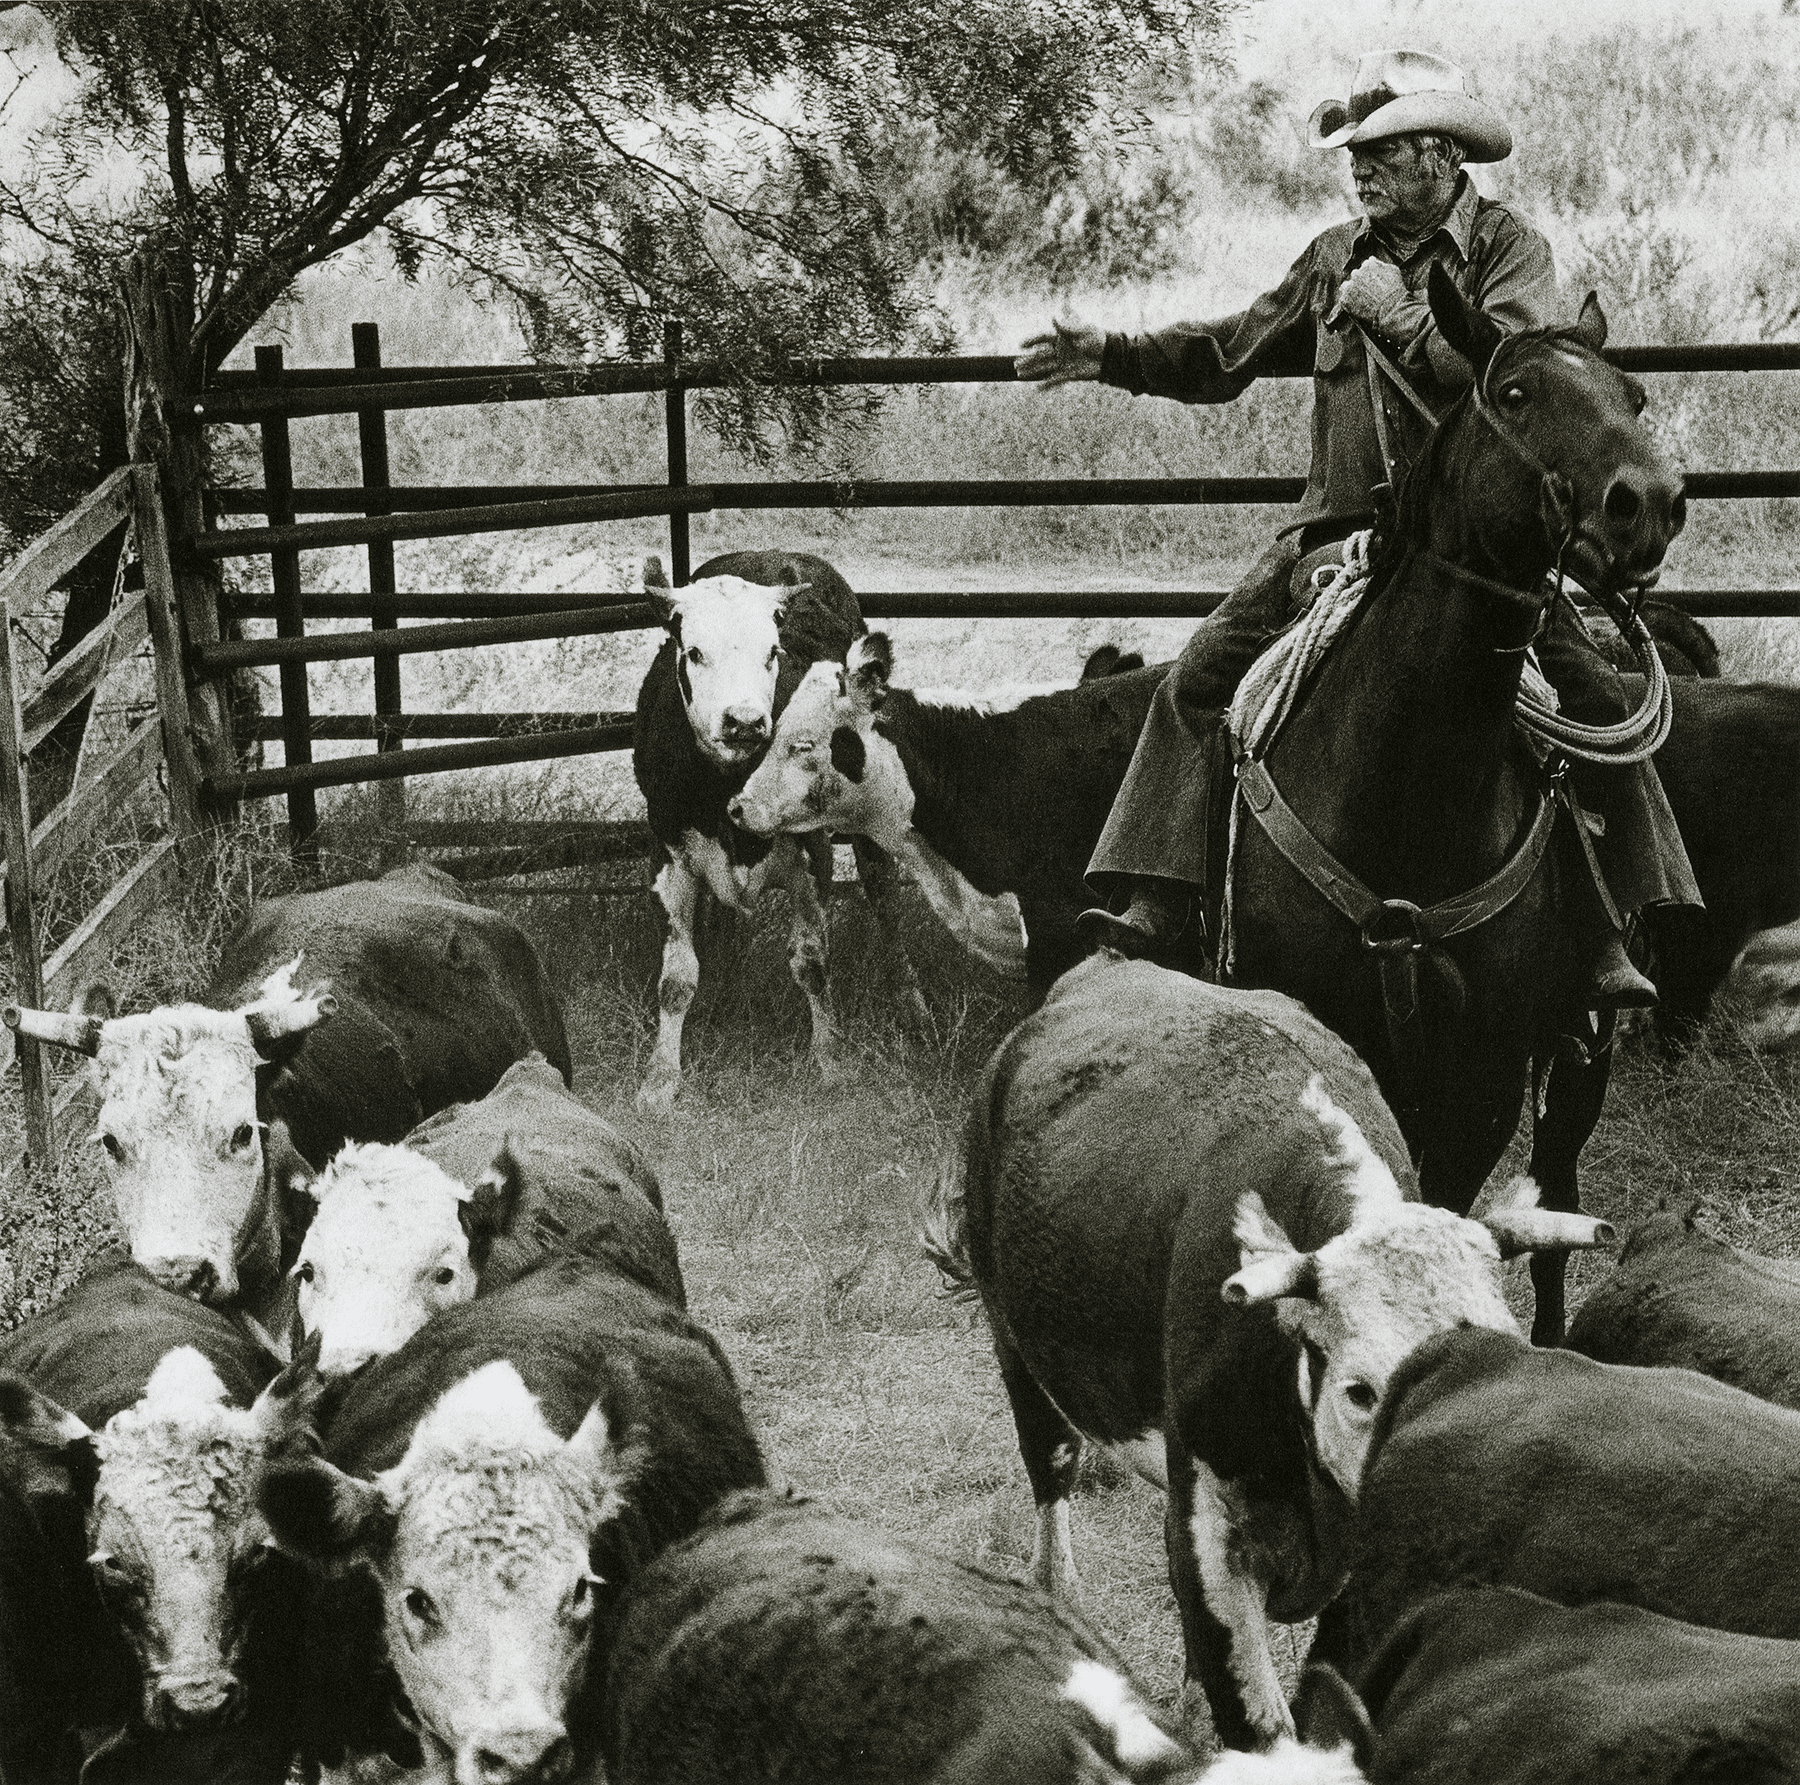 Laura Wilson, "Sonny Edgar Sorting in the West Corrals," 1987 silver gelatin print on paper, Museum purchase, 1991.3.8